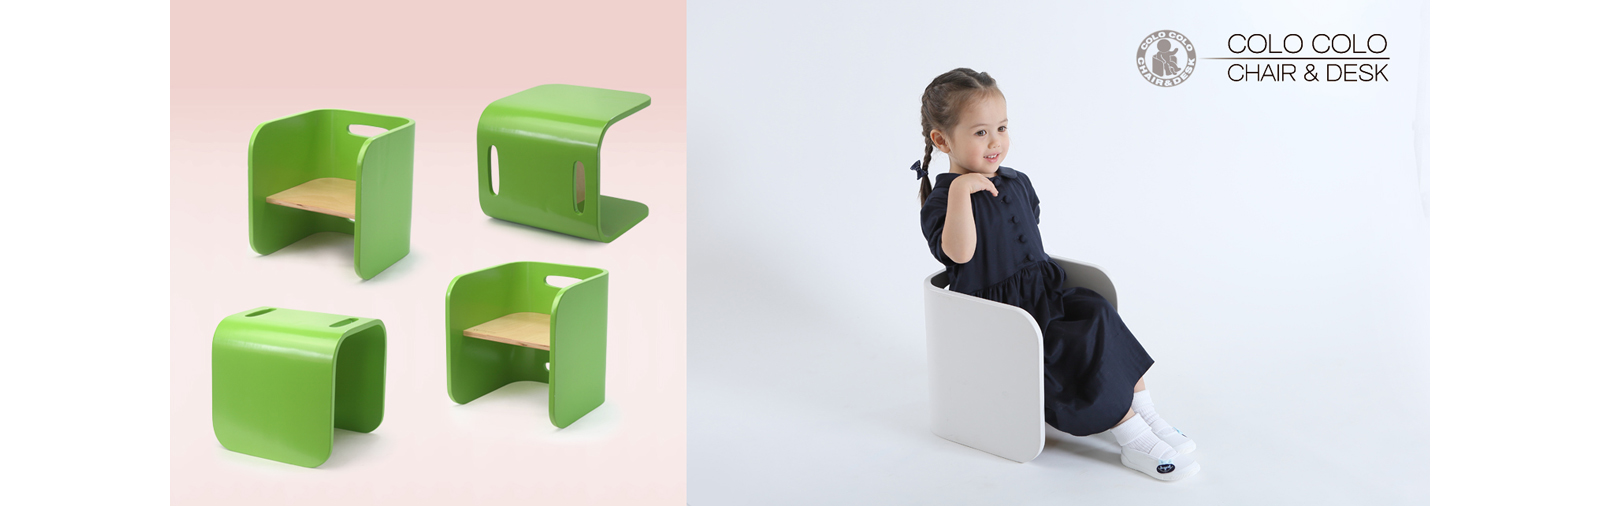 Baby Chair Desk and Chair for Children | ColoColo Chair & Desk